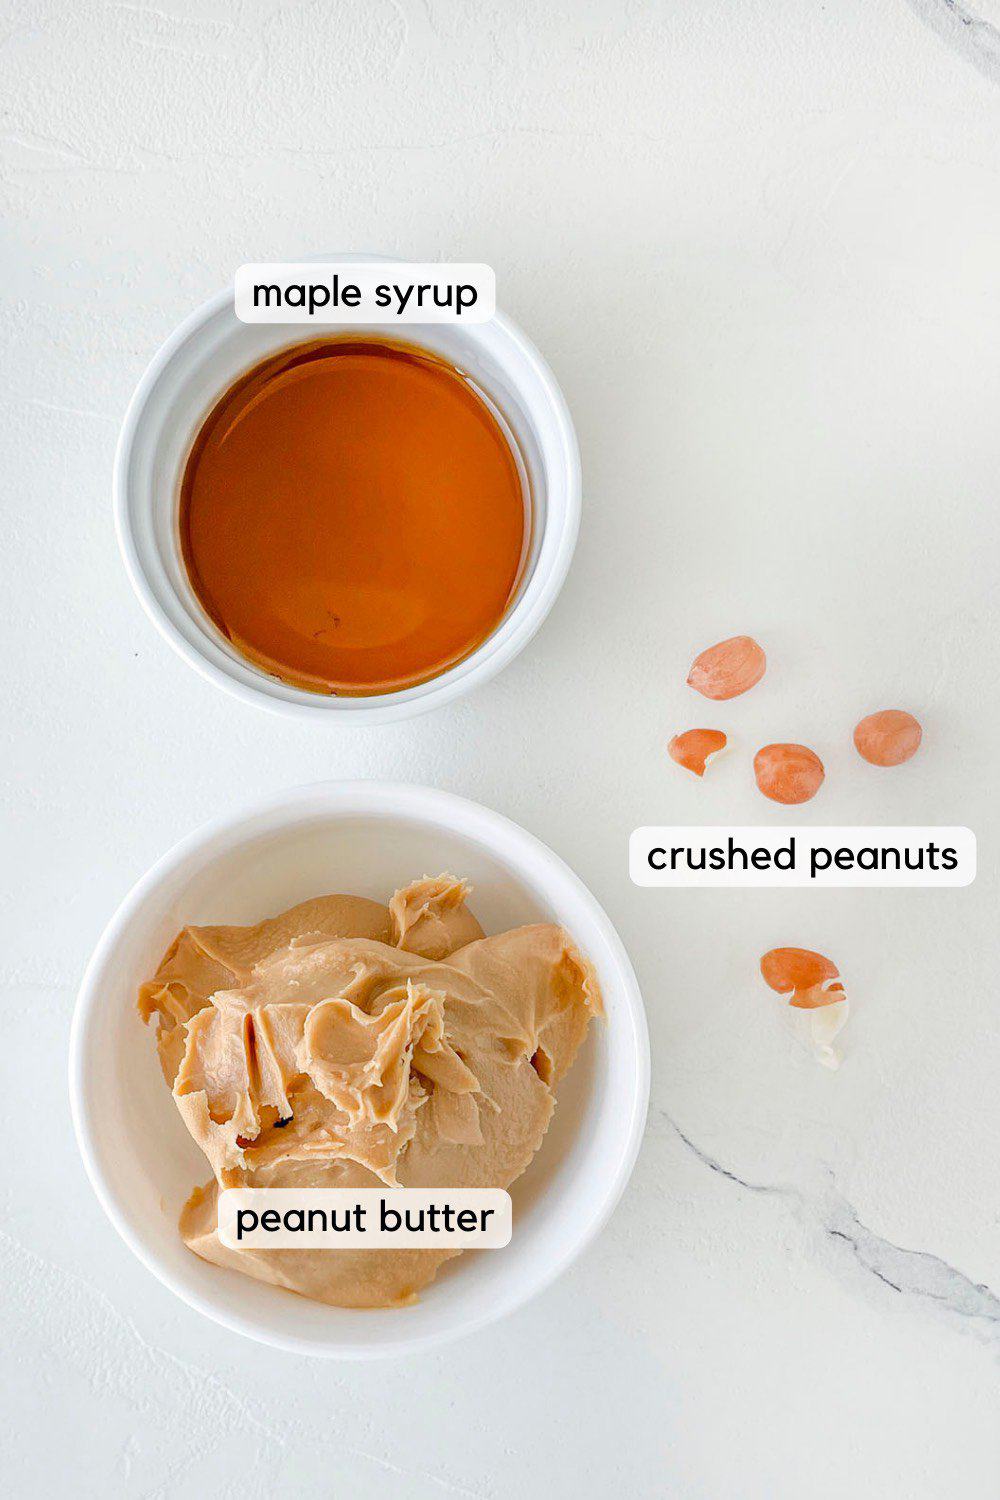 Ingredient photo - maple syrup, peanuts and peanut butter.